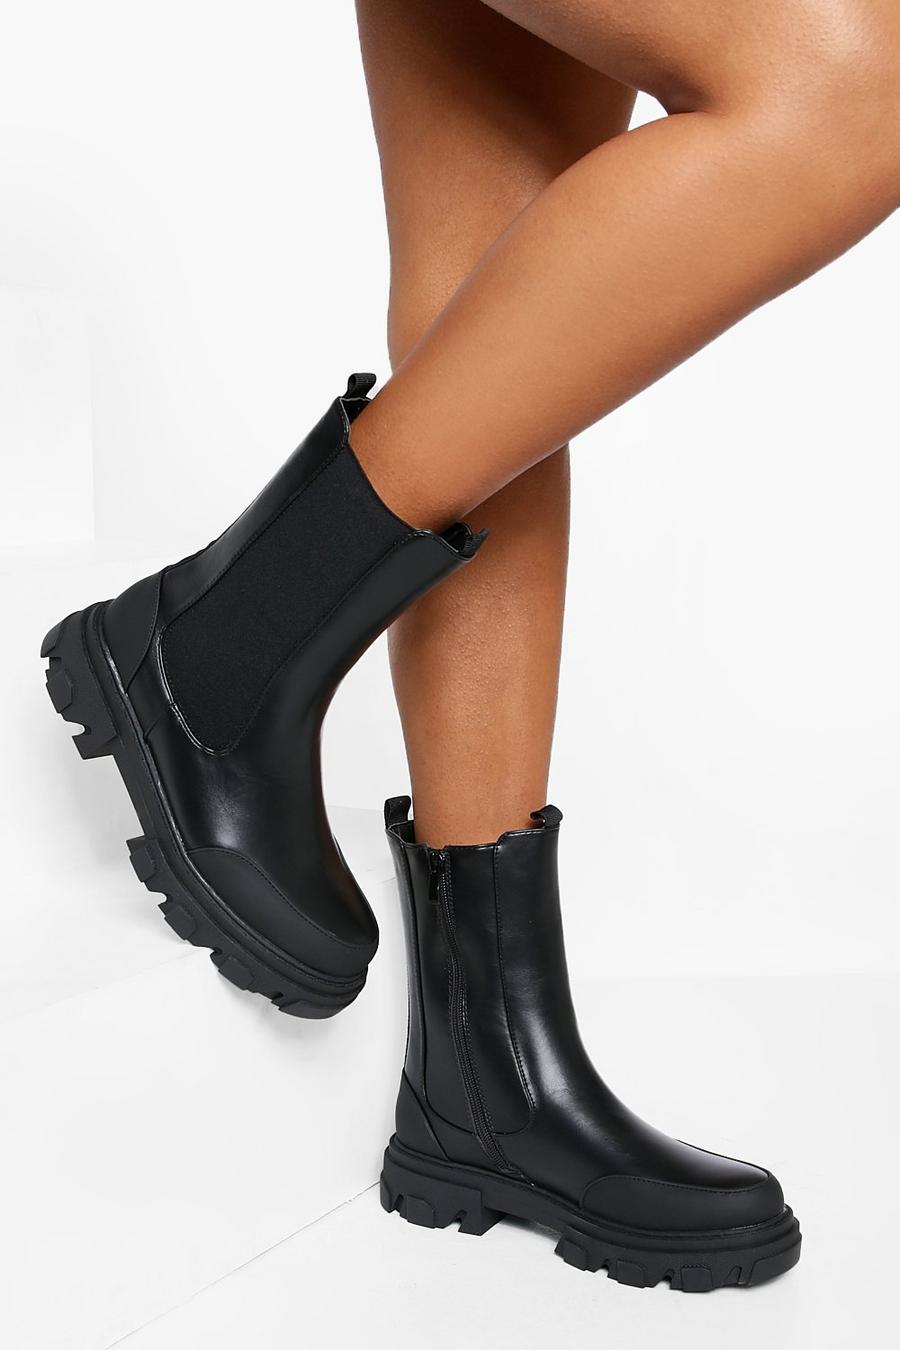 Black Cleated Calf Height Chelsea Boots